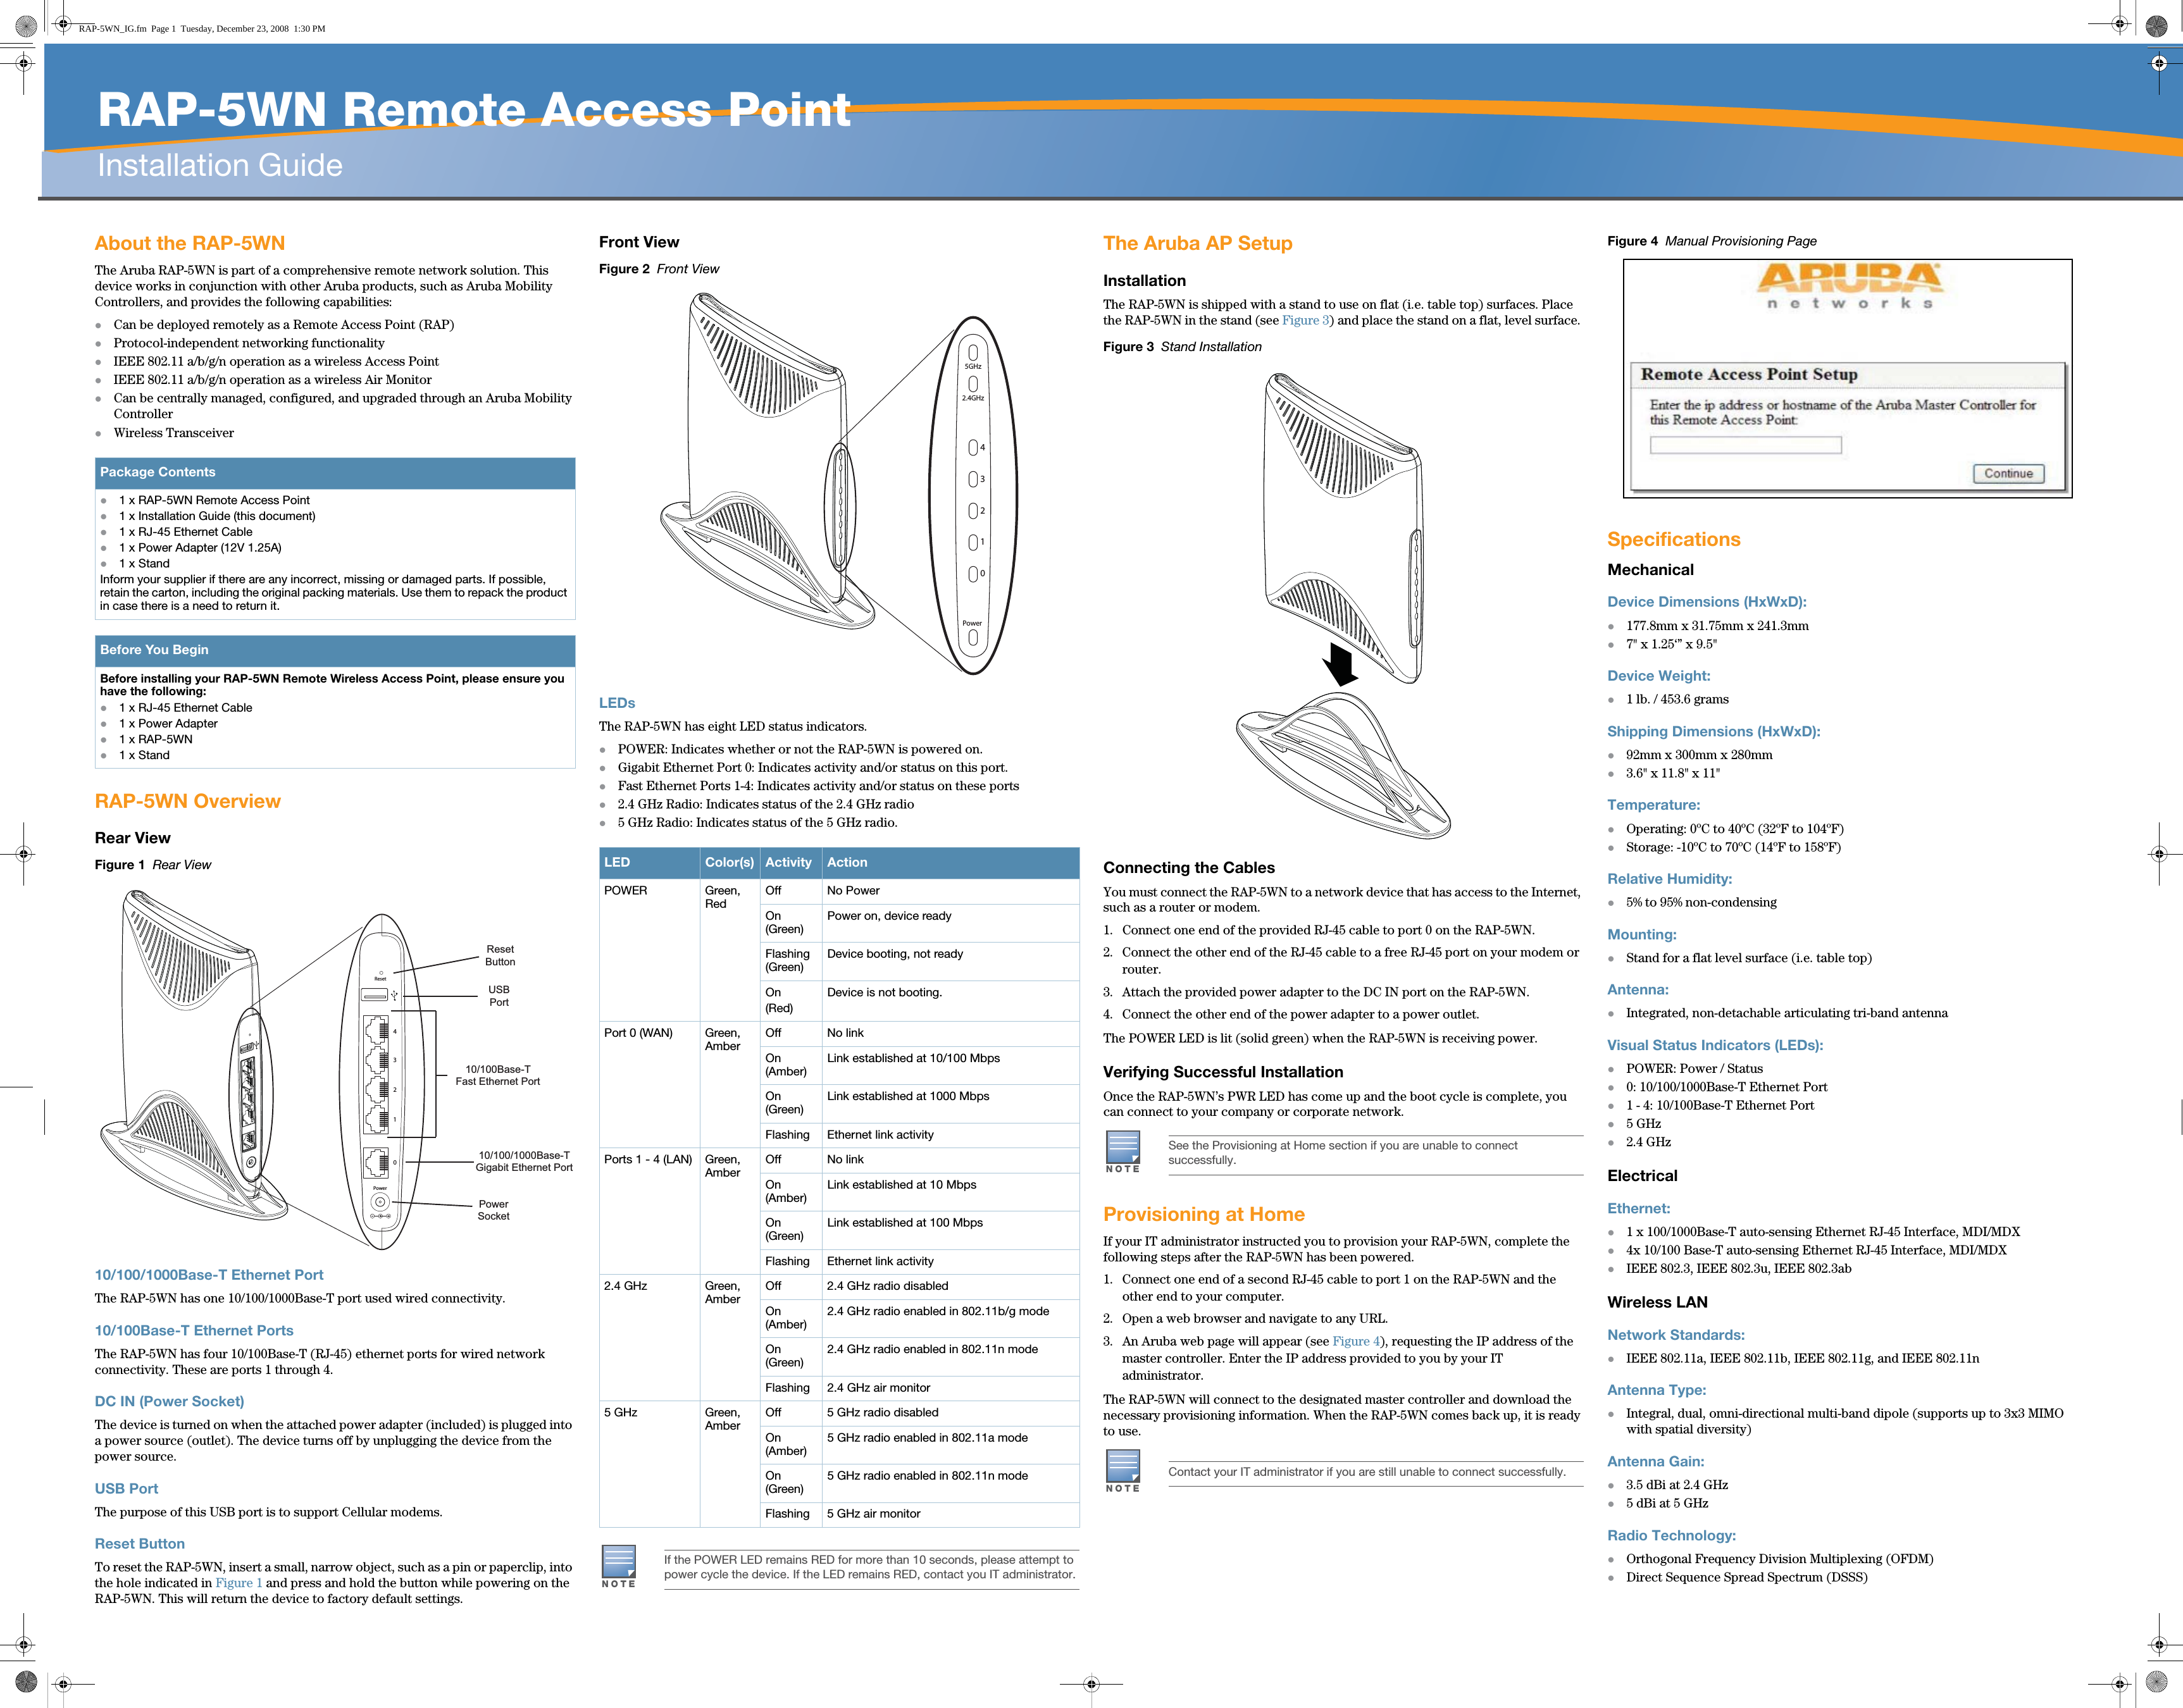   RAP-5WN Remote Access PointInstallation Guide About the RAP-5WNThe Aruba RAP-5WN is part of a comprehensive remote network solution. This device works in conjunction with other Aruba products, such as Aruba Mobility Controllers, and provides the following capabilities:zCan be deployed remotely as a Remote Access Point (RAP)zProtocol-independent networking functionalityzIEEE 802.11 a/b/g/n operation as a wireless Access PointzIEEE 802.11 a/b/g/n operation as a wireless Air MonitorzCan be centrally managed, configured, and upgraded through an Aruba Mobility ControllerzWireless TransceiverRAP-5WN OverviewRear ViewFigure 1  Rear View10/100/1000Base-T Ethernet PortThe RAP-5WN has one 10/100/1000Base-T port used wired connectivity.10/100Base-T Ethernet PortsThe RAP-5WN has four 10/100Base-T (RJ-45) ethernet ports for wired network connectivity. These are ports 1 through 4.DC IN (Power Socket)The device is turned on when the attached power adapter (included) is plugged into a power source (outlet). The device turns off by unplugging the device from the power source.USB PortThe purpose of this USB port is to support Cellular modems. Reset ButtonTo reset the RAP-5WN, insert a small, narrow object, such as a pin or paperclip, into the hole indicated in Figure 1 and press and hold the button while powering on the RAP-5WN. This will return the device to factory default settings. Front ViewFigure 2  Front ViewLEDsThe RAP-5WN has eight LED status indicators. zPOWER: Indicates whether or not the RAP-5WN is powered on. zGigabit Ethernet Port 0: Indicates activity and/or status on this port.zFast Ethernet Ports 1-4: Indicates activity and/or status on these portsz2.4 GHz Radio: Indicates status of the 2.4 GHz radioz5 GHz Radio: Indicates status of the 5 GHz radio.The Aruba AP Setup InstallationThe RAP-5WN is shipped with a stand to use on flat (i.e. table top) surfaces. Place the RAP-5WN in the stand (see Figure 3) and place the stand on a flat, level surface. Figure 3  Stand InstallationConnecting the CablesYou must connect the RAP-5WN to a network device that has access to the Internet, such as a router or modem. 1. Connect one end of the provided RJ-45 cable to port 0 on the RAP-5WN.2. Connect the other end of the RJ-45 cable to a free RJ-45 port on your modem or router. 3. Attach the provided power adapter to the DC IN port on the RAP-5WN.4. Connect the other end of the power adapter to a power outlet.The POWER LED is lit (solid green) when the RAP-5WN is receiving power. Verifying Successful InstallationOnce the RAP-5WN’s PWR LED has come up and the boot cycle is complete, you can connect to your company or corporate network.Provisioning at HomeIf your IT administrator instructed you to provision your RAP-5WN, complete the following steps after the RAP-5WN has been powered.1. Connect one end of a second RJ-45 cable to port 1 on the RAP-5WN and the other end to your computer.2. Open a web browser and navigate to any URL.3. An Aruba web page will appear (see Figure 4), requesting the IP address of the master controller. Enter the IP address provided to you by your IT administrator.The RAP-5WN will connect to the designated master controller and download the necessary provisioning information. When the RAP-5WN comes back up, it is ready to use. Figure 4  Manual Provisioning PageSpecificationsMechanicalDevice Dimensions (HxWxD):z177.8mm x 31.75mm x 241.3mmz7&quot; x 1.25‘” x 9.5&quot;Device Weight: z1 lb. / 453.6 gramsShipping Dimensions (HxWxD):z92mm x 300mm x 280mmz3.6&quot; x 11.8&quot; x 11&quot;Temperature:zOperating: 0ºC to 40ºC (32ºF to 104ºF)zStorage: -10ºC to 70ºC (14ºF to 158ºF)Relative Humidity:z5% to 95% non-condensingMounting:zStand for a flat level surface (i.e. table top)Antenna:zIntegrated, non-detachable articulating tri-band antennaVisual Status Indicators (LEDs):zPOWER: Power / Statusz0: 10/100/1000Base-T Ethernet Portz1 - 4: 10/100Base-T Ethernet Portz5 GHzz2.4 GHzElectricalEthernet:z1 x 100/1000Base-T auto-sensing Ethernet RJ-45 Interface, MDI/MDXz4x 10/100 Base-T auto-sensing Ethernet RJ-45 Interface, MDI/MDXzIEEE 802.3, IEEE 802.3u, IEEE 802.3abWireless LANNetwork Standards:zIEEE 802.11a, IEEE 802.11b, IEEE 802.11g, and IEEE 802.11nAntenna Type:zIntegral, dual, omni-directional multi-band dipole (supports up to 3x3 MIMO with spatial diversity)Antenna Gain:z3.5 dBi at 2.4 GHzz5 dBi at 5 GHzRadio Technology:zOrthogonal Frequency Division Multiplexing (OFDM)zDirect Sequence Spread Spectrum (DSSS)Package Contentsz1 x RAP-5WN Remote Access Point z1 x Installation Guide (this document)z1 x RJ-45 Ethernet Cablez1 x Power Adapter (12V 1.25A)z1 x StandInform your supplier if there are any incorrect, missing or damaged parts. If possible, retain the carton, including the original packing materials. Use them to repack the product in case there is a need to return it.Before You BeginBefore installing your RAP-5WN Remote Wireless Access Point, please ensure you have the following:z1 x RJ-45 Ethernet Cable z1 x Power Adapterz1 x RAP-5WNz1 x StandPower01234ResetPowerSocketResetButtonUSBPort10/100/1000Base-TGigabit Ethernet Port10/100Base-TFast Ethernet PortLED Color(s) Activity ActionPOWER Green, RedOff No PowerOn (Green)Power on, device readyFlashing (Green)Device booting, not readyOn (Red)Device is not booting.Port 0 (WAN) Green, AmberOff No linkOn (Amber)Link established at 10/100 MbpsOn (Green)Link established at 1000 MbpsFlashing Ethernet link activityPorts 1 - 4 (LAN) Green, AmberOff No linkOn (Amber)Link established at 10 MbpsOn (Green)Link established at 100 MbpsFlashing Ethernet link activity2.4 GHz Green, AmberOff 2.4 GHz radio disabledOn (Amber)2.4 GHz radio enabled in 802.11b/g modeOn (Green)2.4 GHz radio enabled in 802.11n modeFlashing 2.4 GHz air monitor5 GHz Green, AmberOff 5 GHz radio disabledOn (Amber)5 GHz radio enabled in 802.11a modeOn (Green)5 GHz radio enabled in 802.11n modeFlashing 5 GHz air monitorNOTEIf the POWER LED remains RED for more than 10 seconds, please attempt to power cycle the device. If the LED remains RED, contact you IT administrator.Power012342.4GHz5GHzNOTESee the Provisioning at Home section if you are unable to connect successfully.NOTEContact your IT administrator if you are still unable to connect successfully.RAP-5WN_IG.fm  Page 1  Tuesday, December 23, 2008  1:30 PM